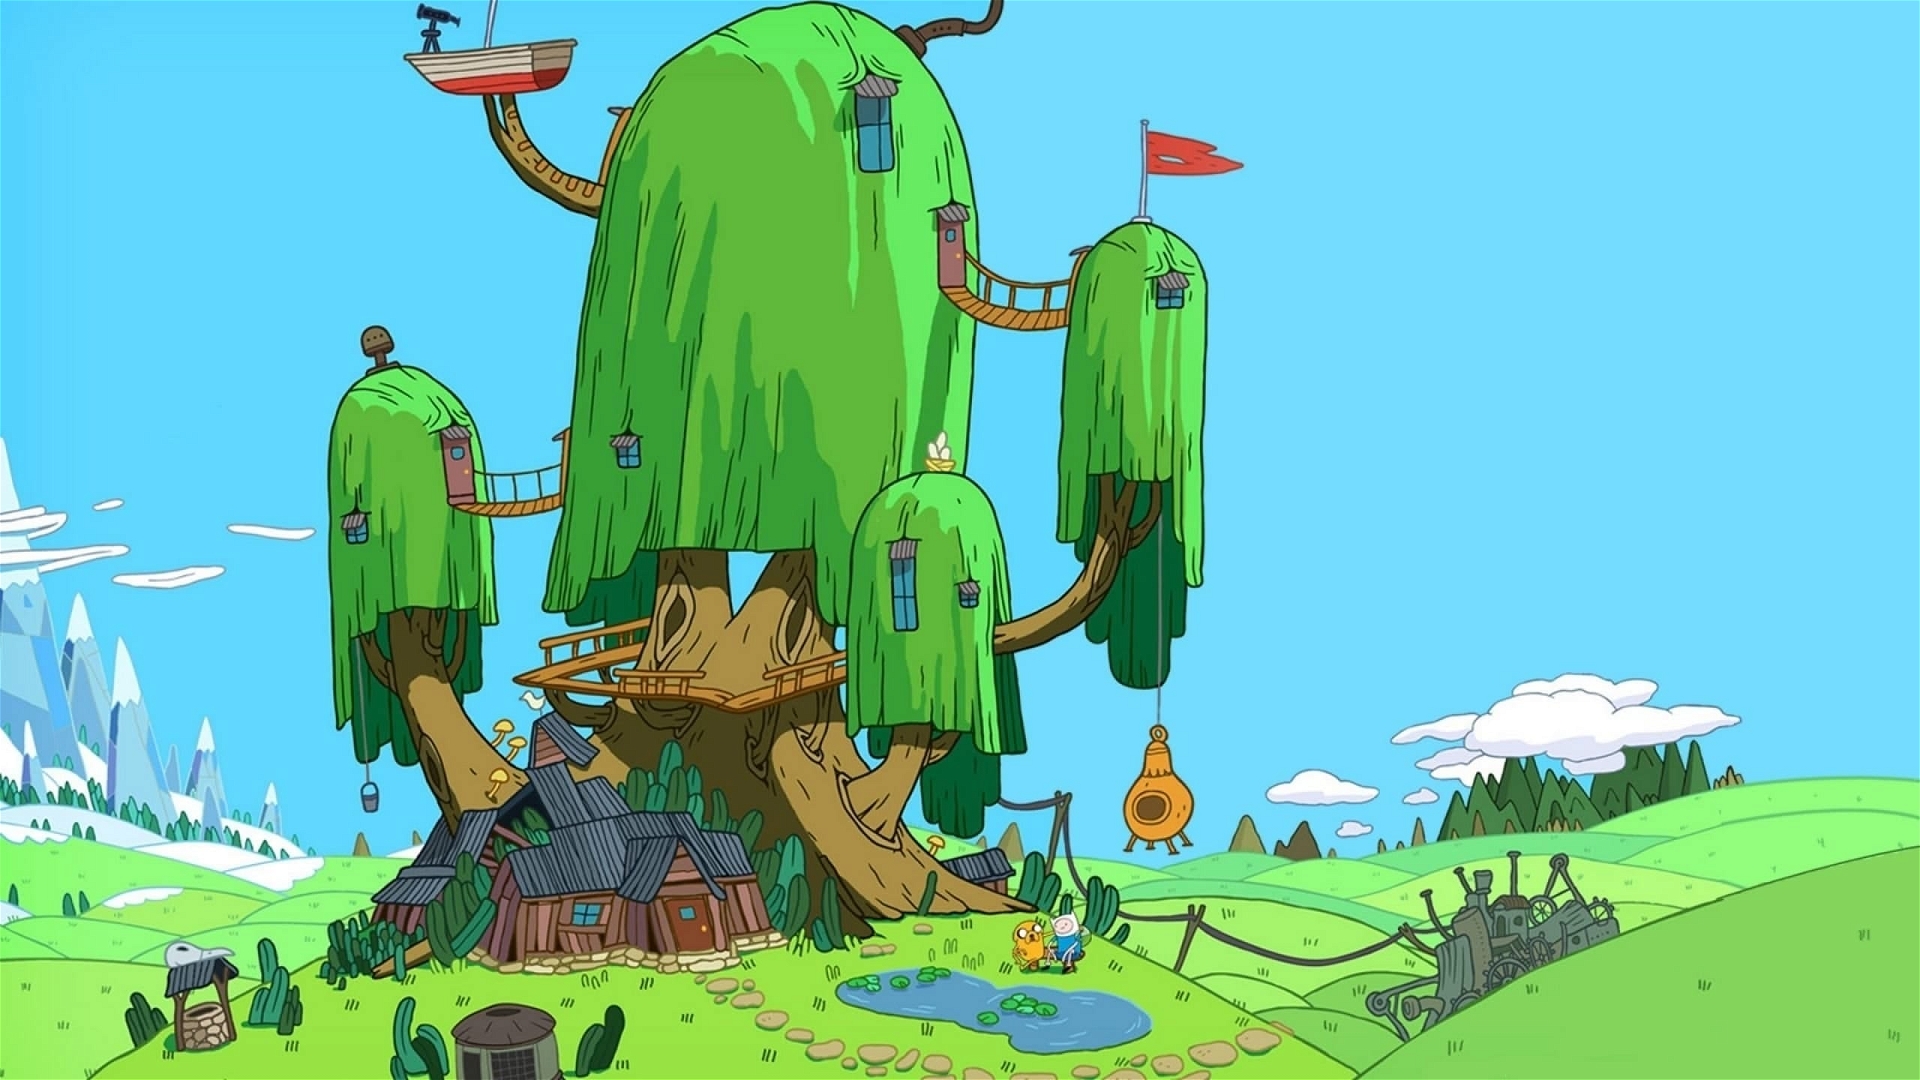 Adventure Time: Distant Lands - Rotten Tomatoes